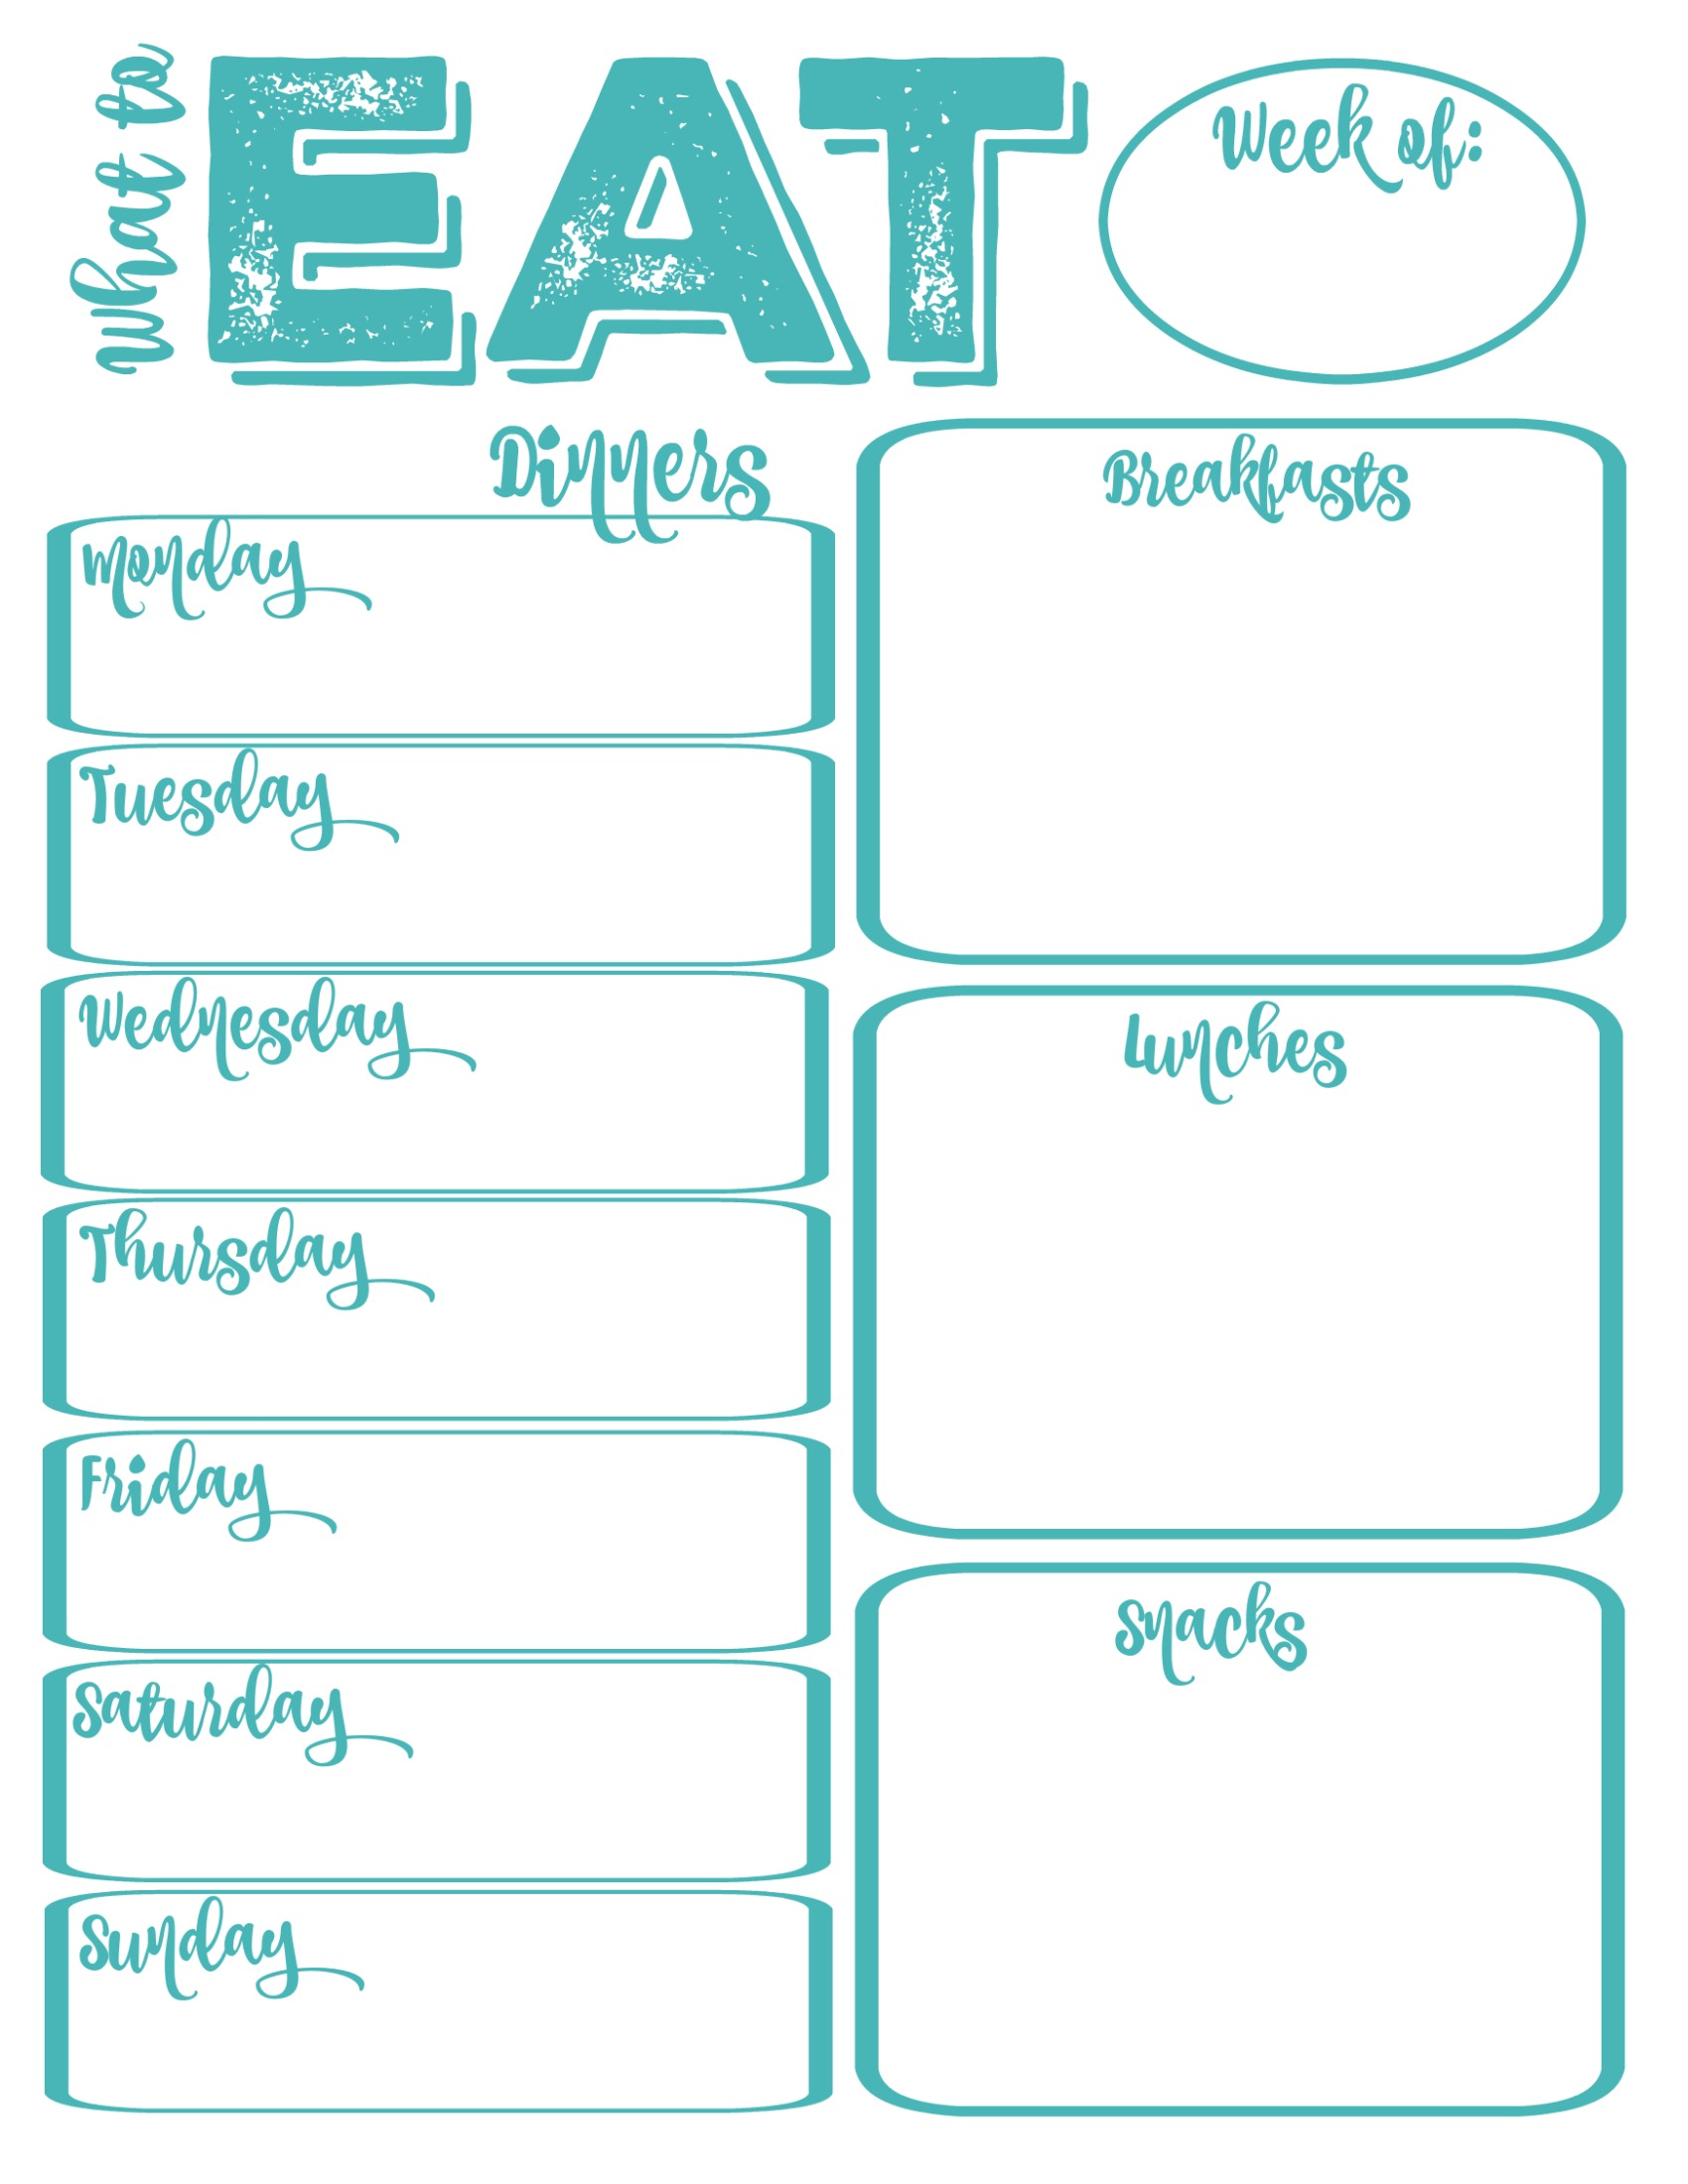 What to Eat Weekly Meal Planning Free Printable in aqua at thehappyhousie.com